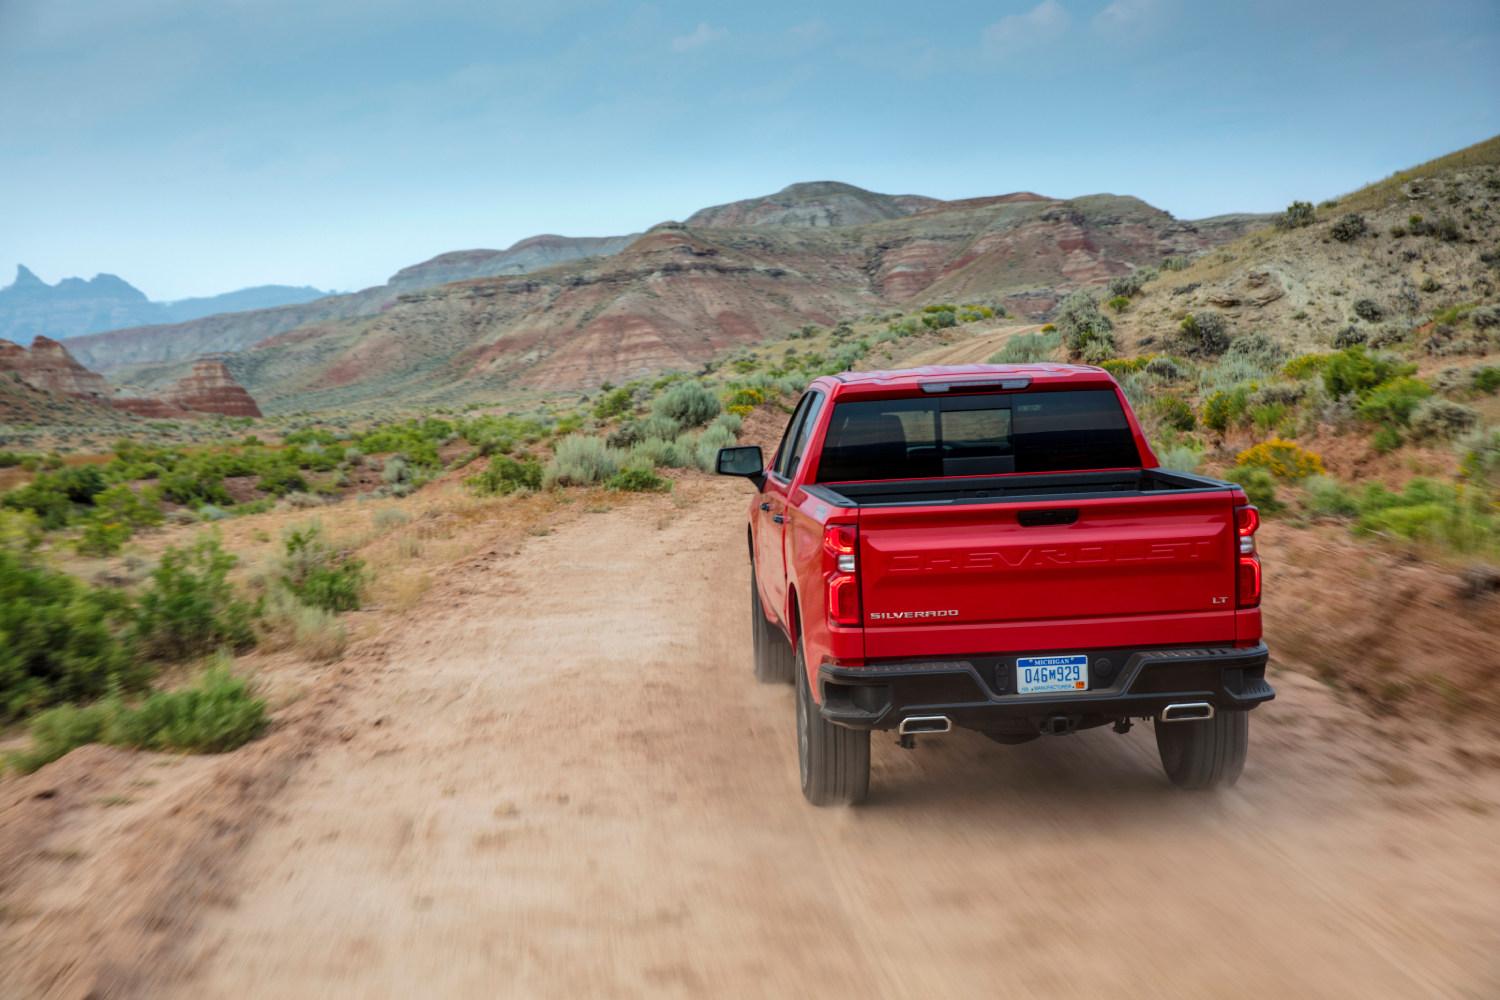 The 2021 Chevy Silverado got different reviews from Consumer Reports and J.D. Power